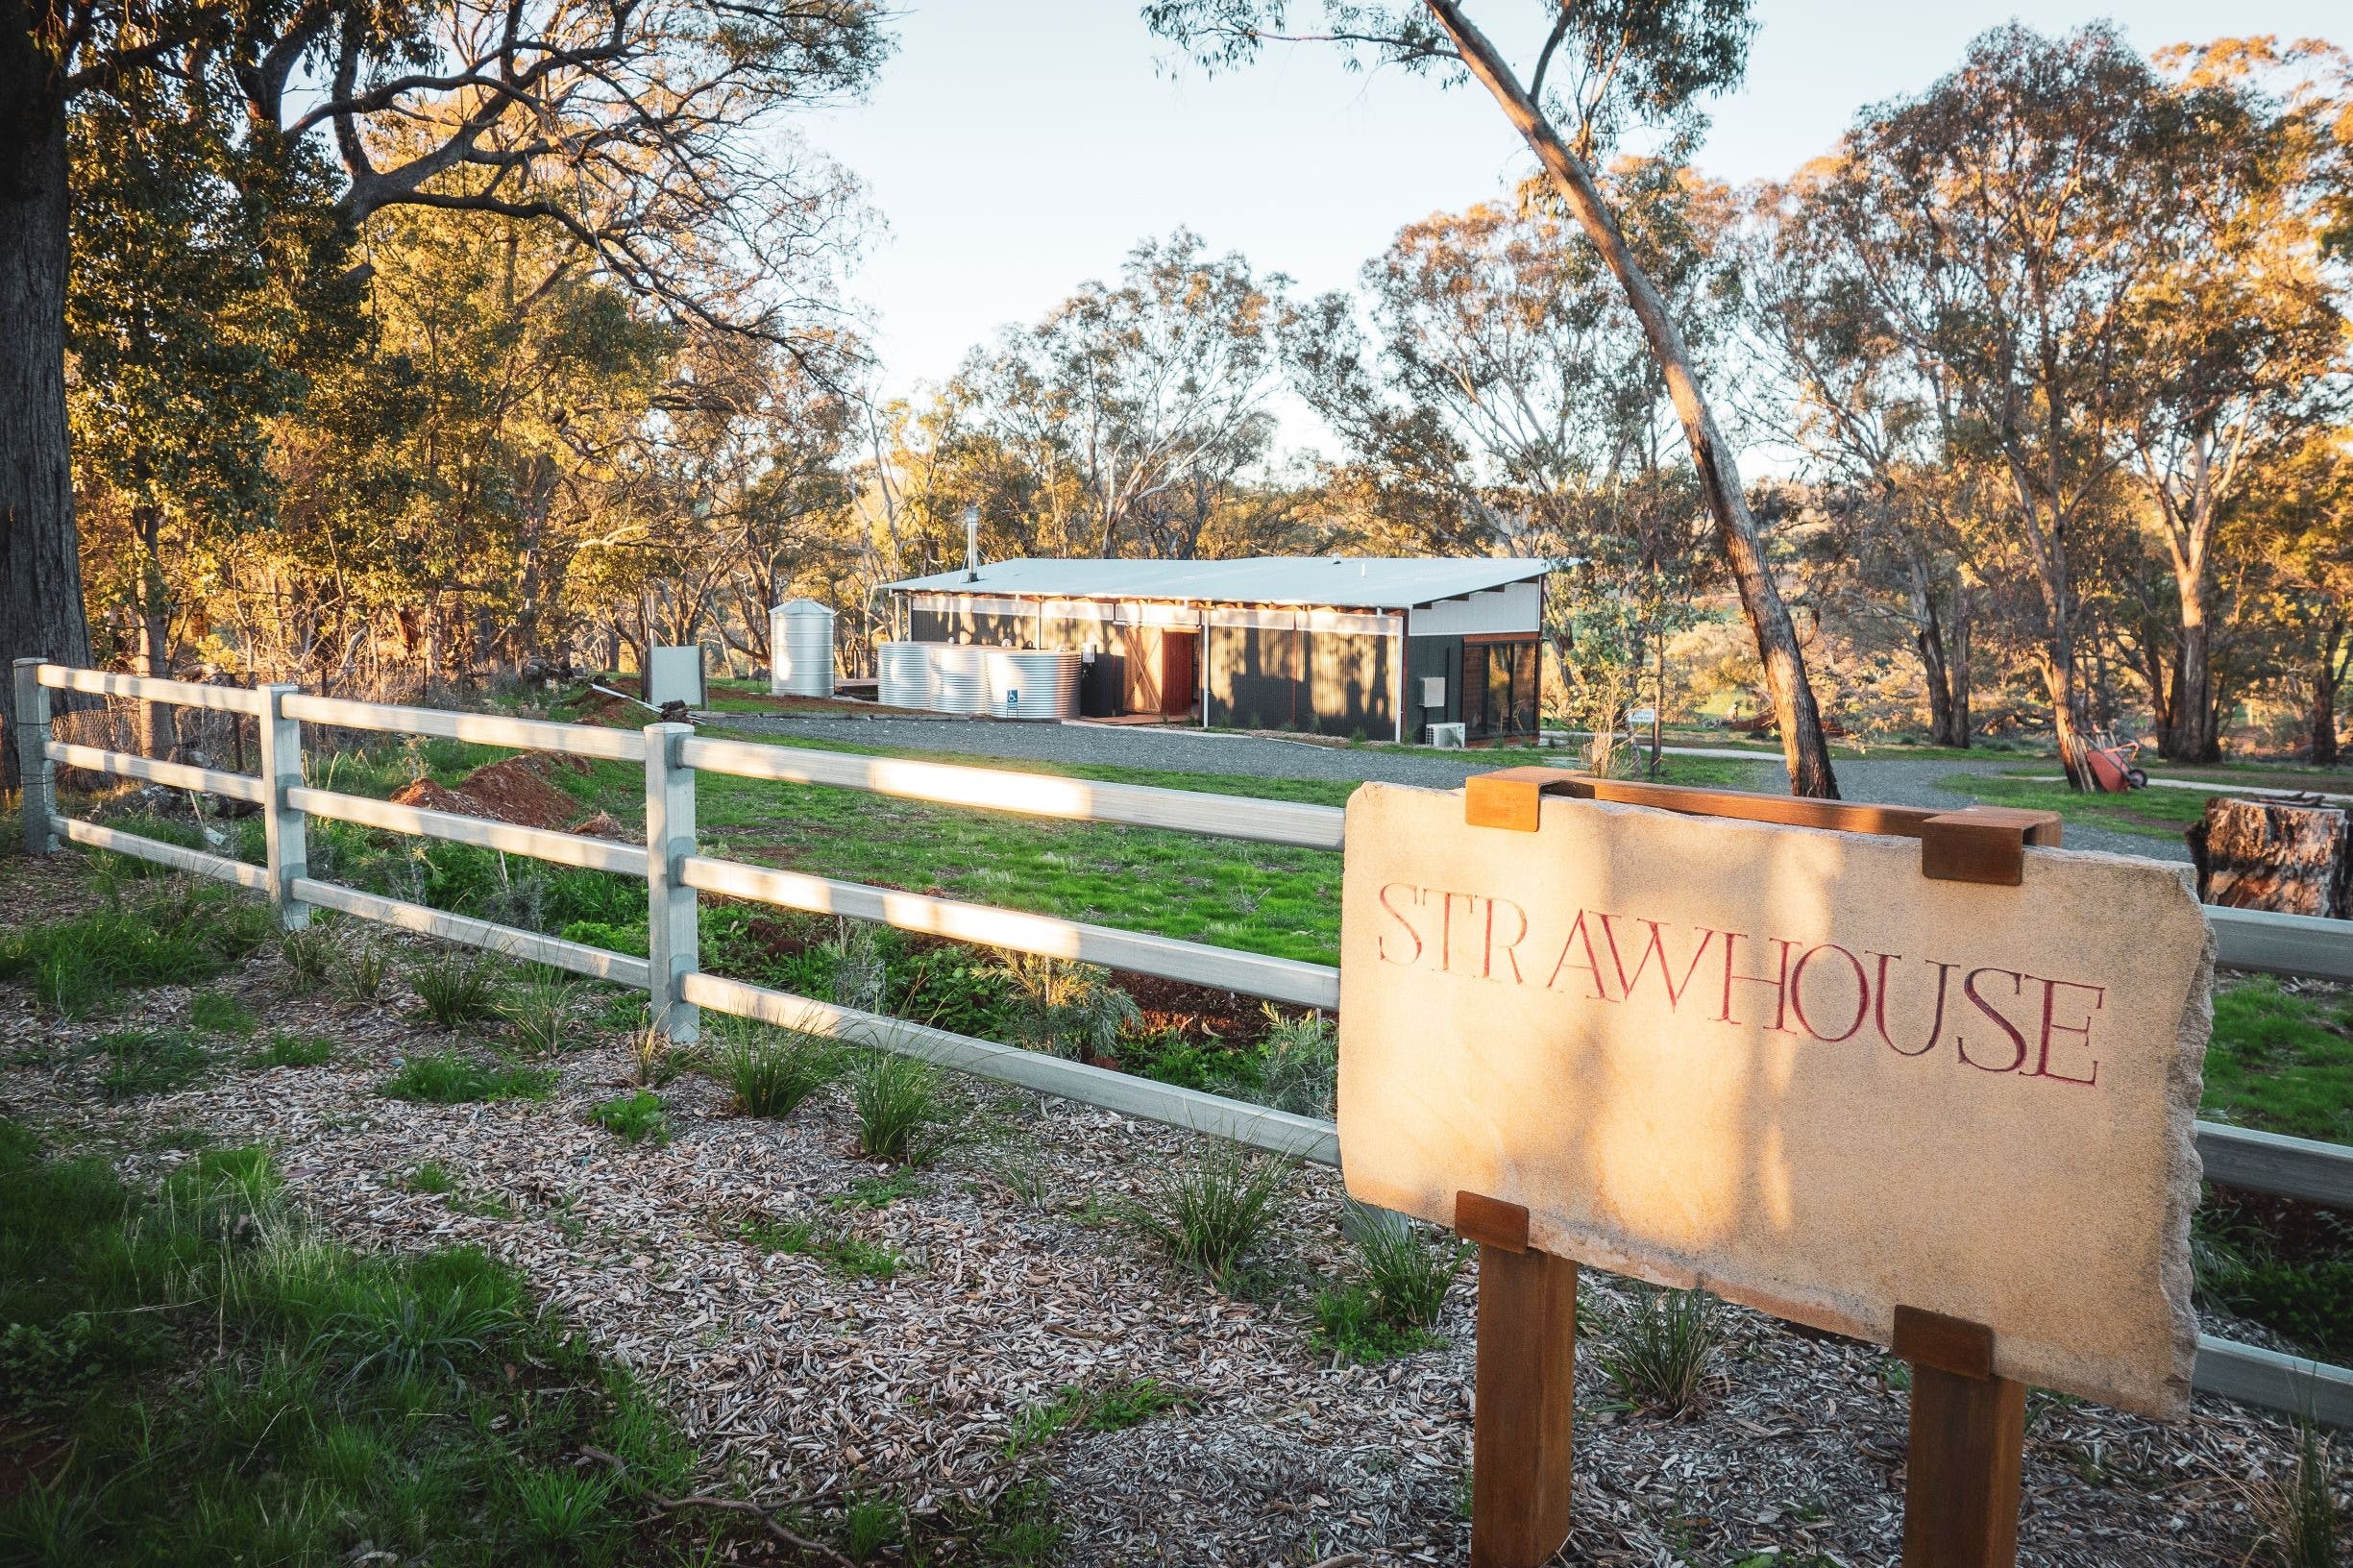 Strawhouse - Accommodation Mt Buller